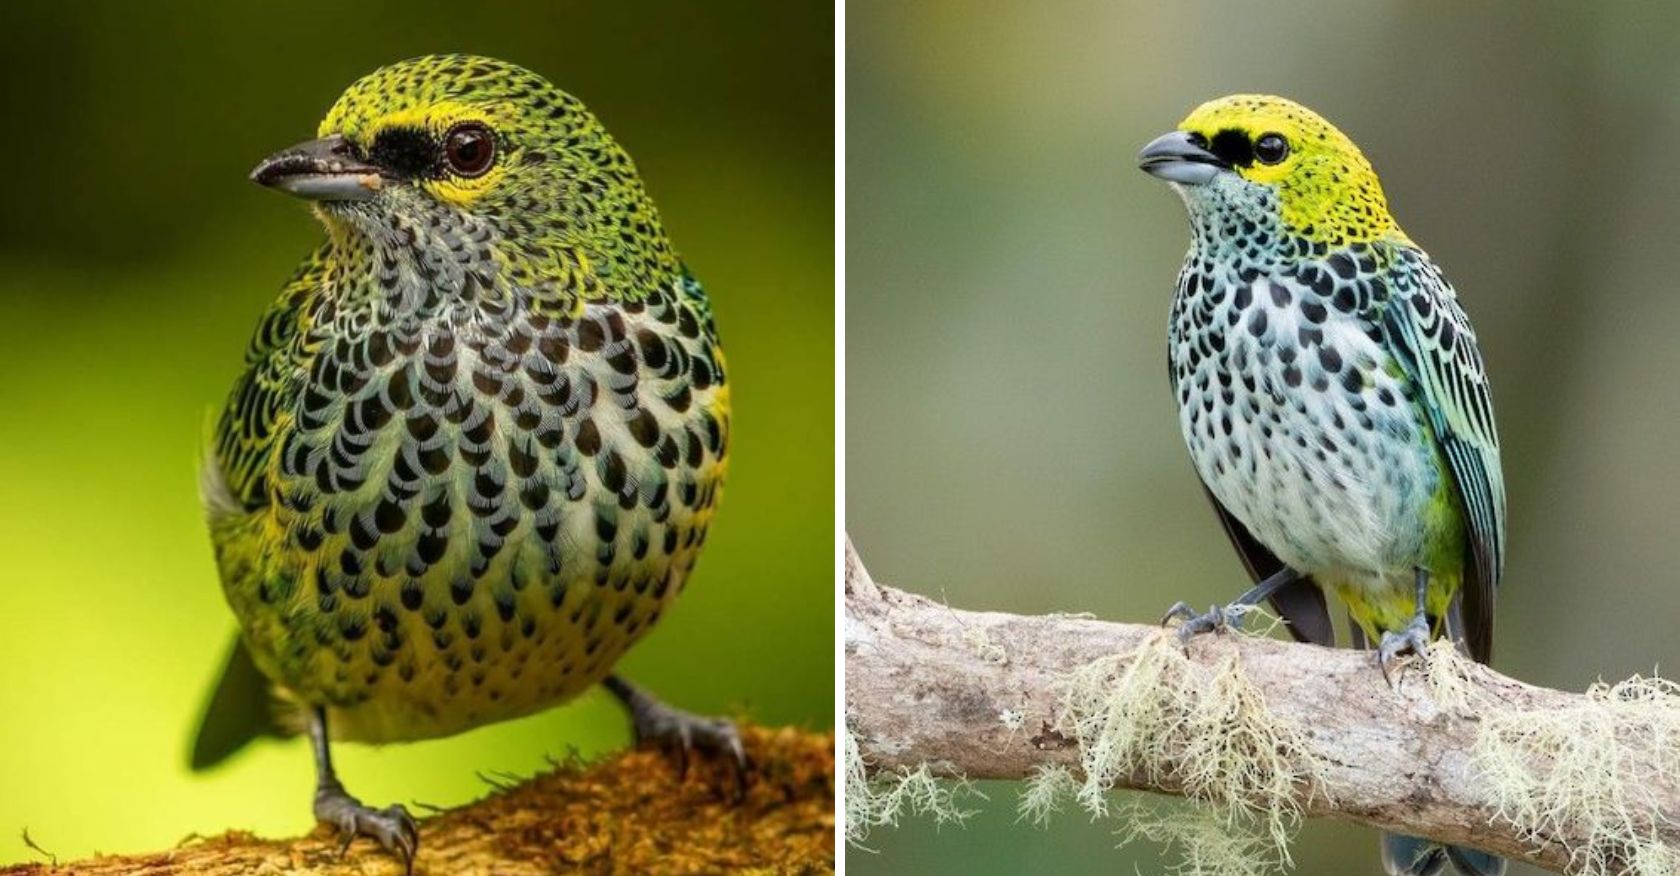 The Speckled Tanager – A Colorful and Melodious Bird of South American Forests